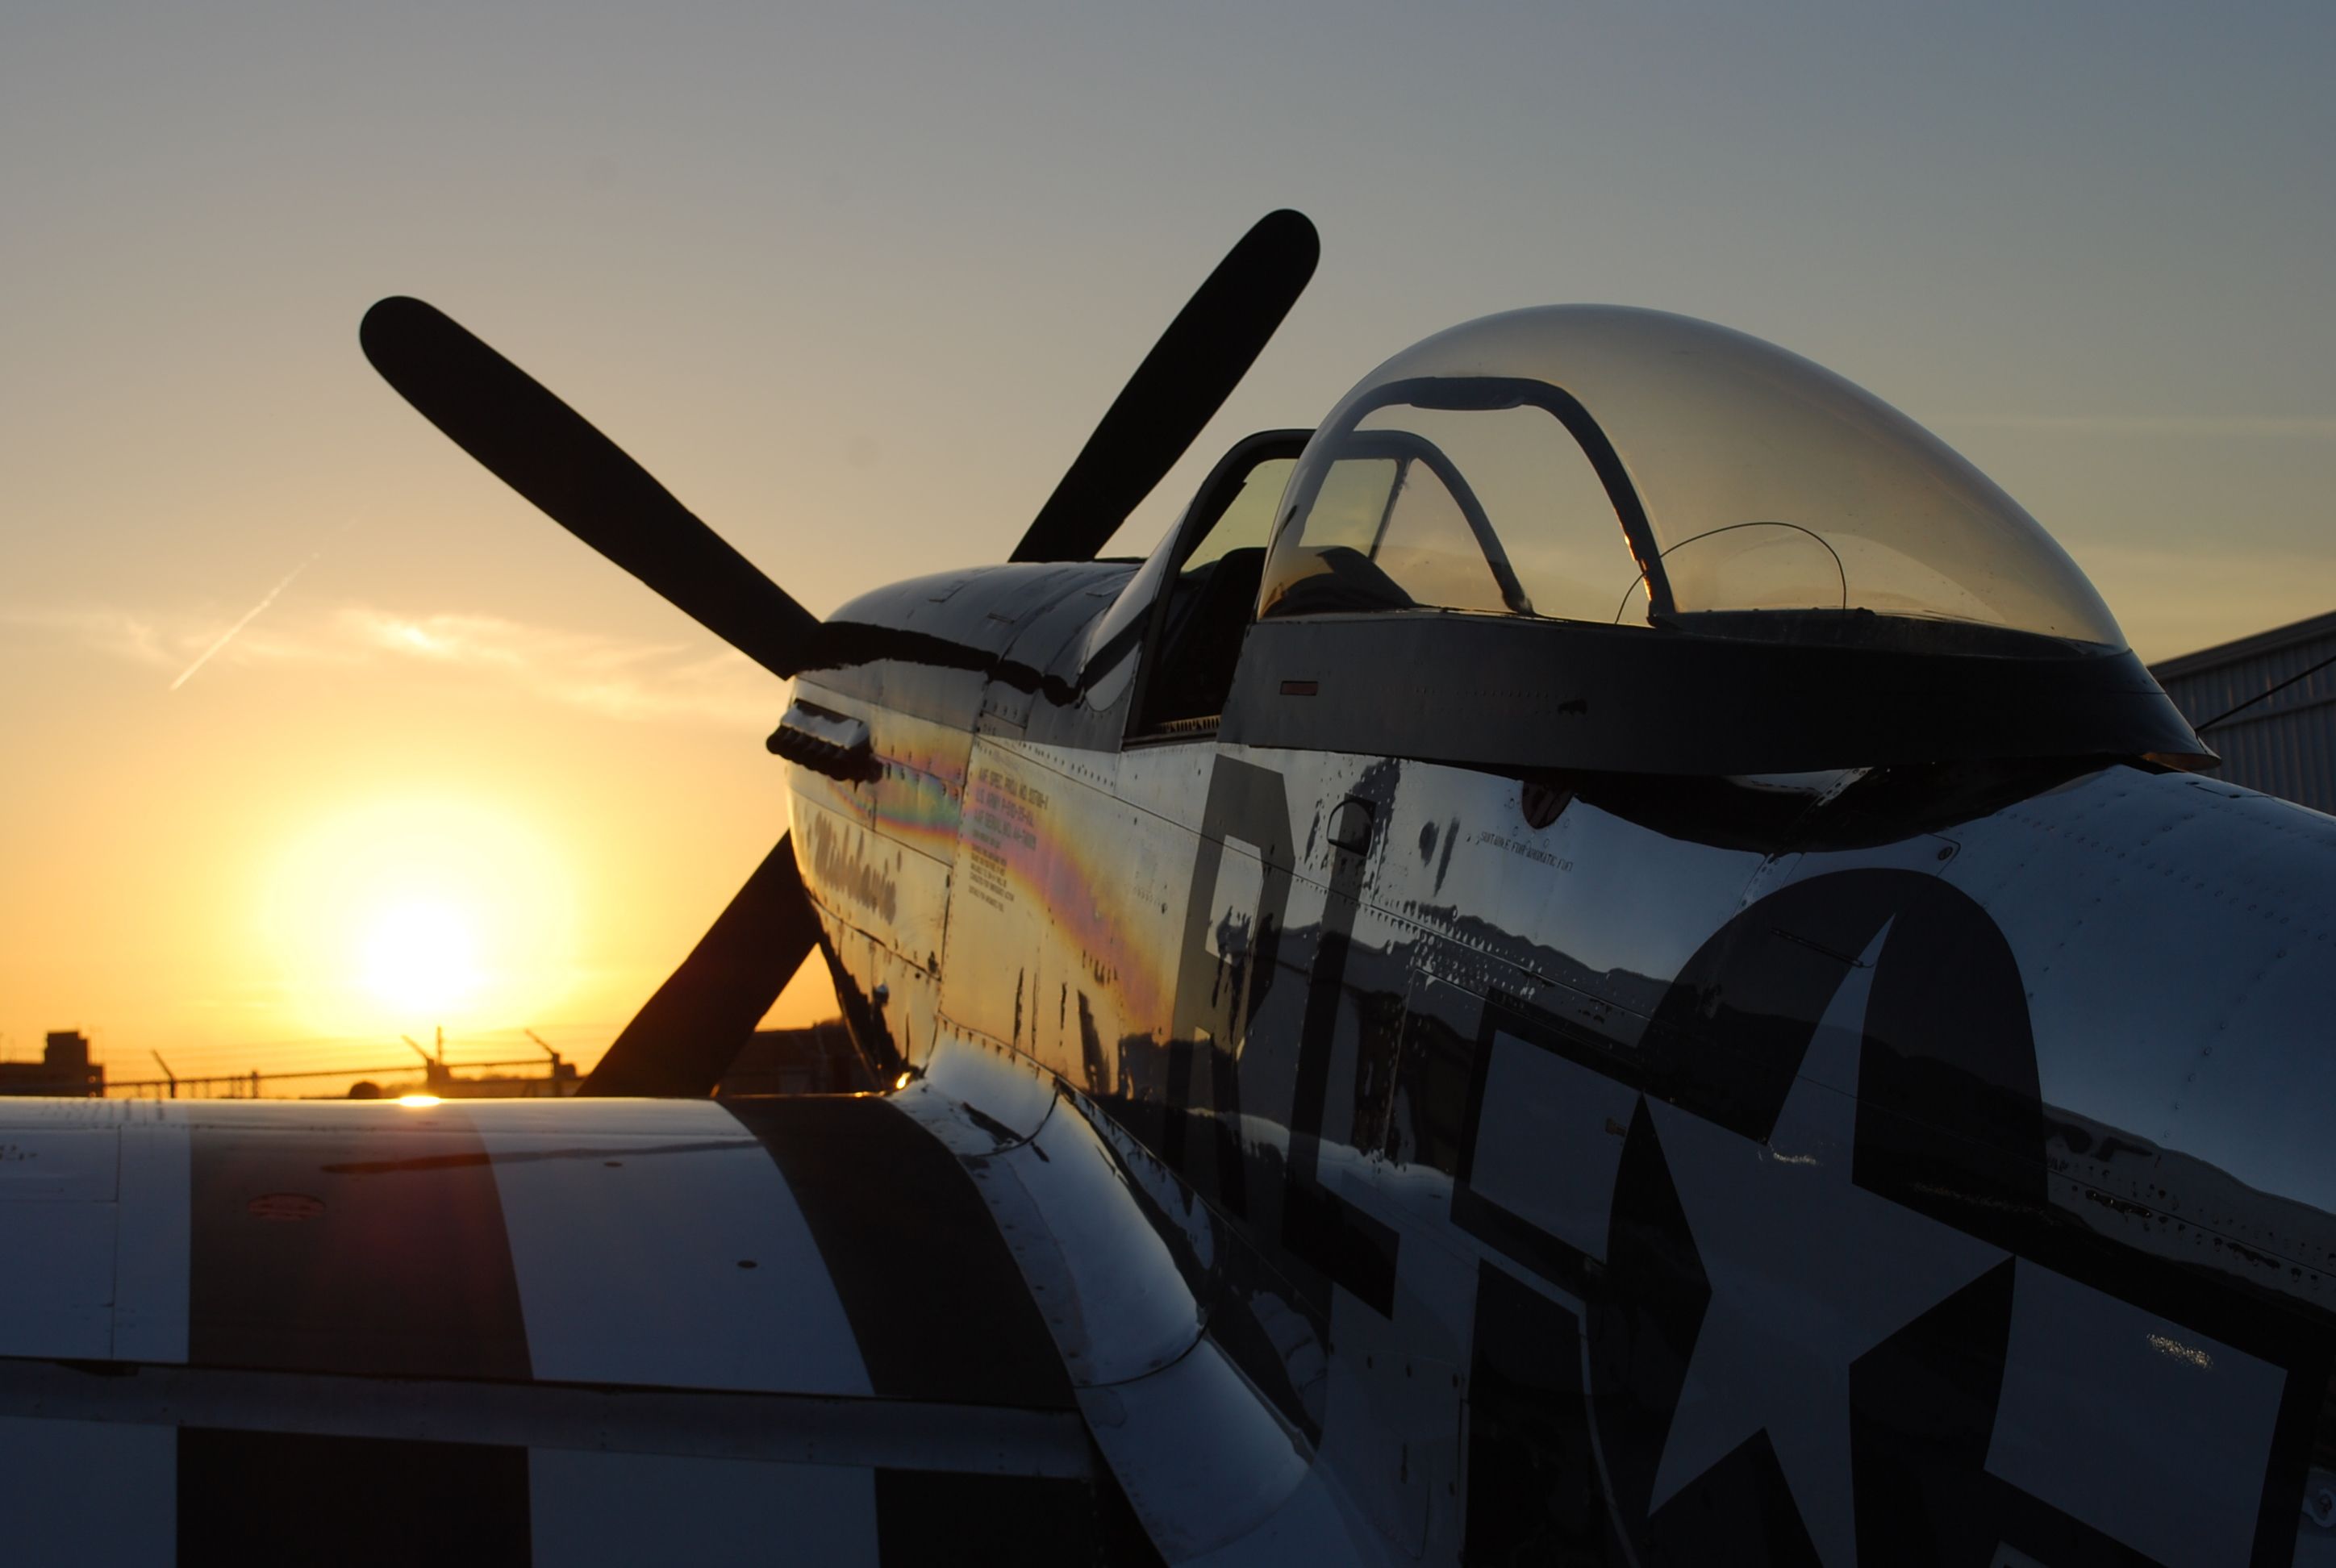 — — - P-51D resting after late afternoon flight in KBHM